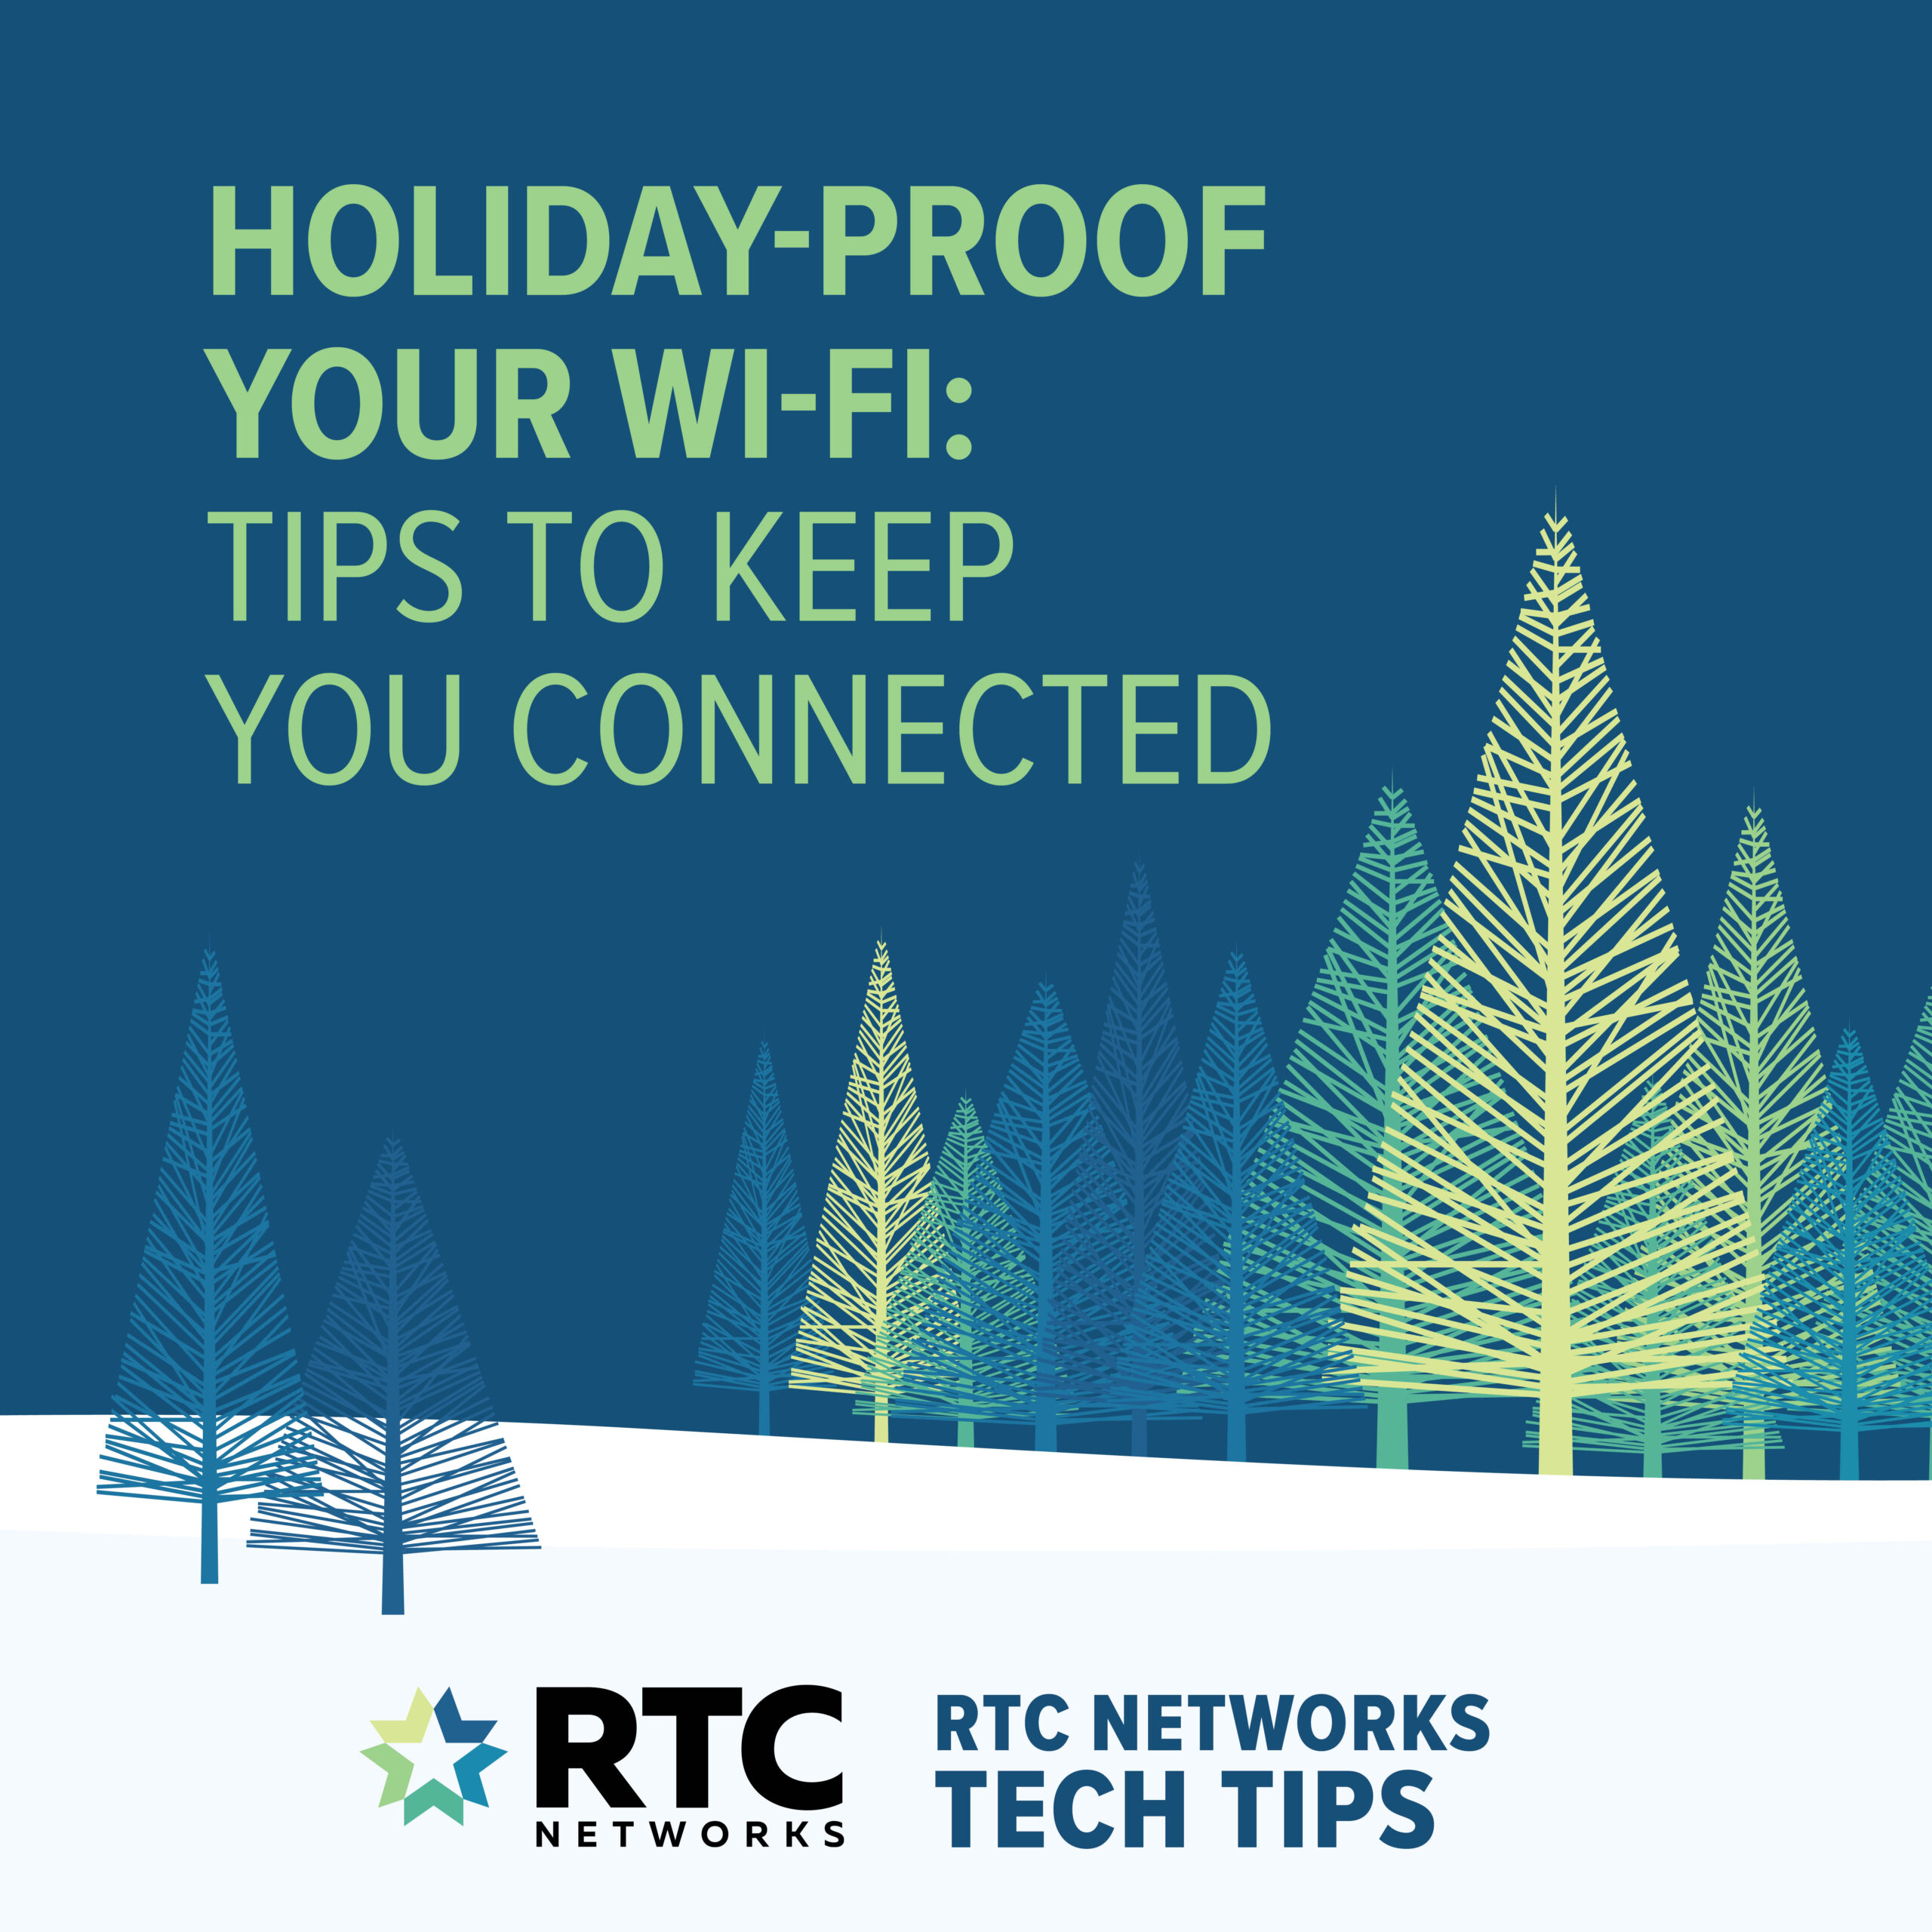 Stay Connected and Protected This Holiday Season